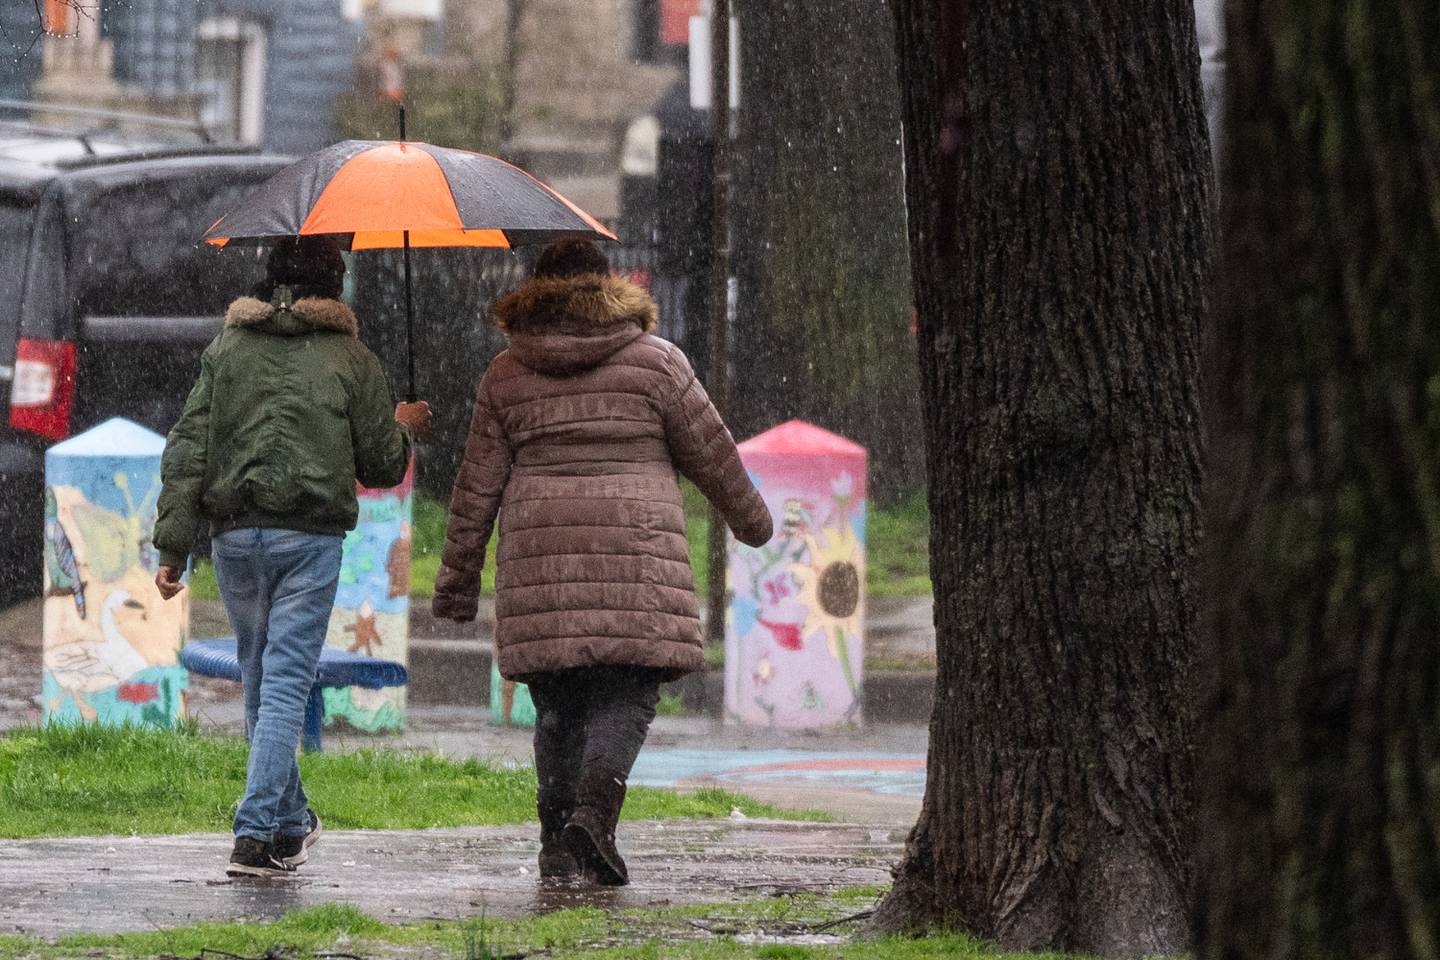 Two people share an umbrella as they walk in the rain.